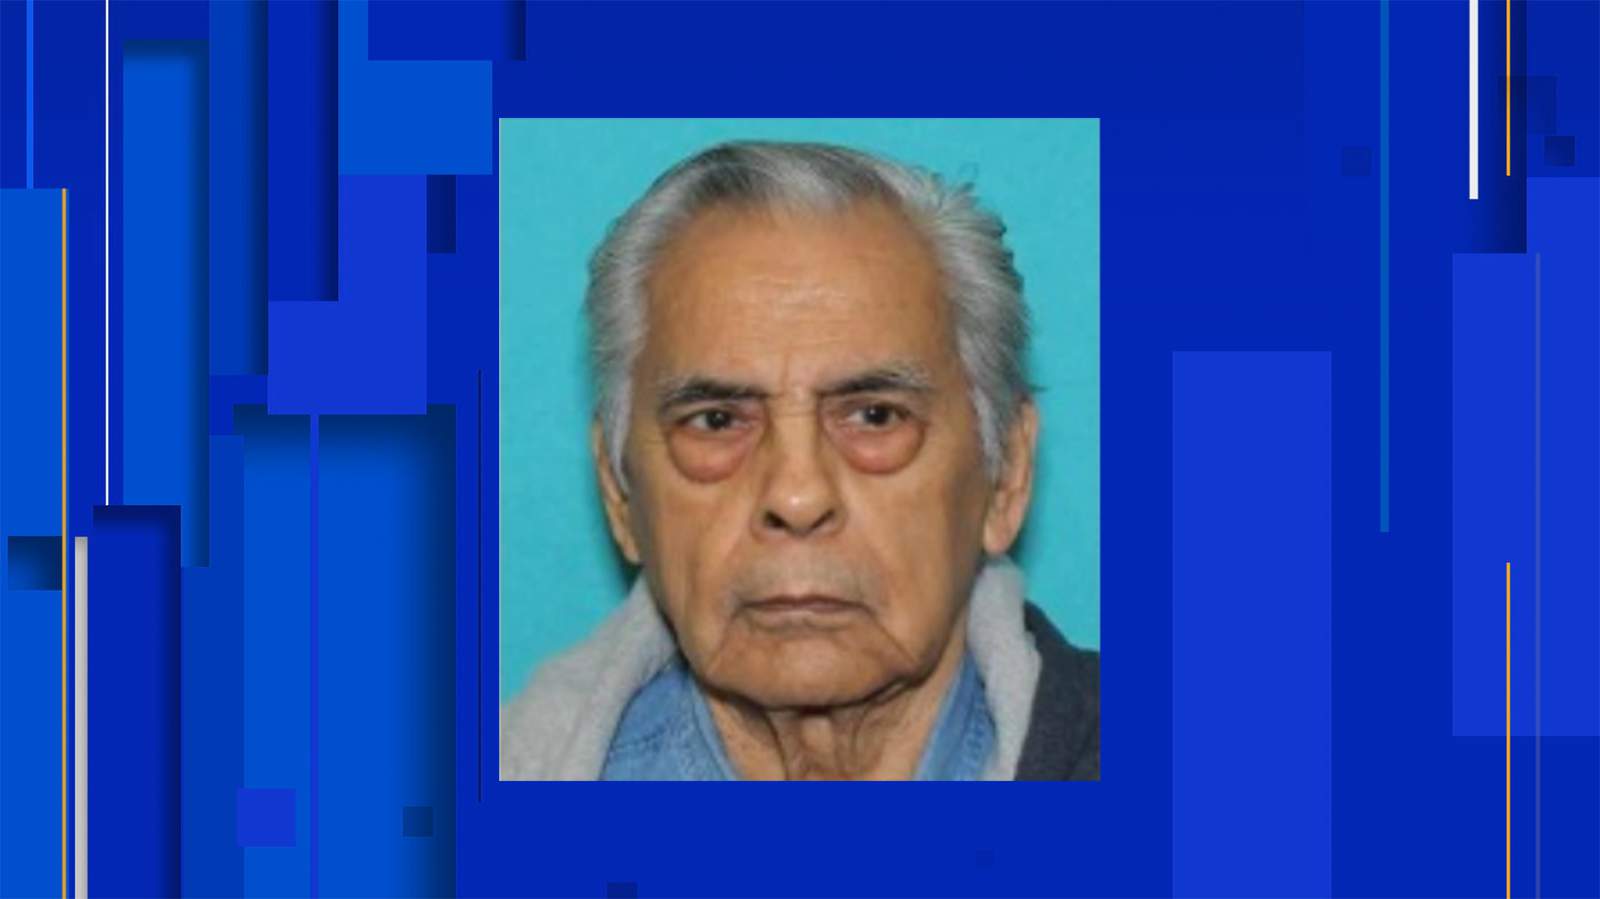 SILVER ALERT: San Antonio police searching for missing 85-year-old man with diagnosed cognitive impairments